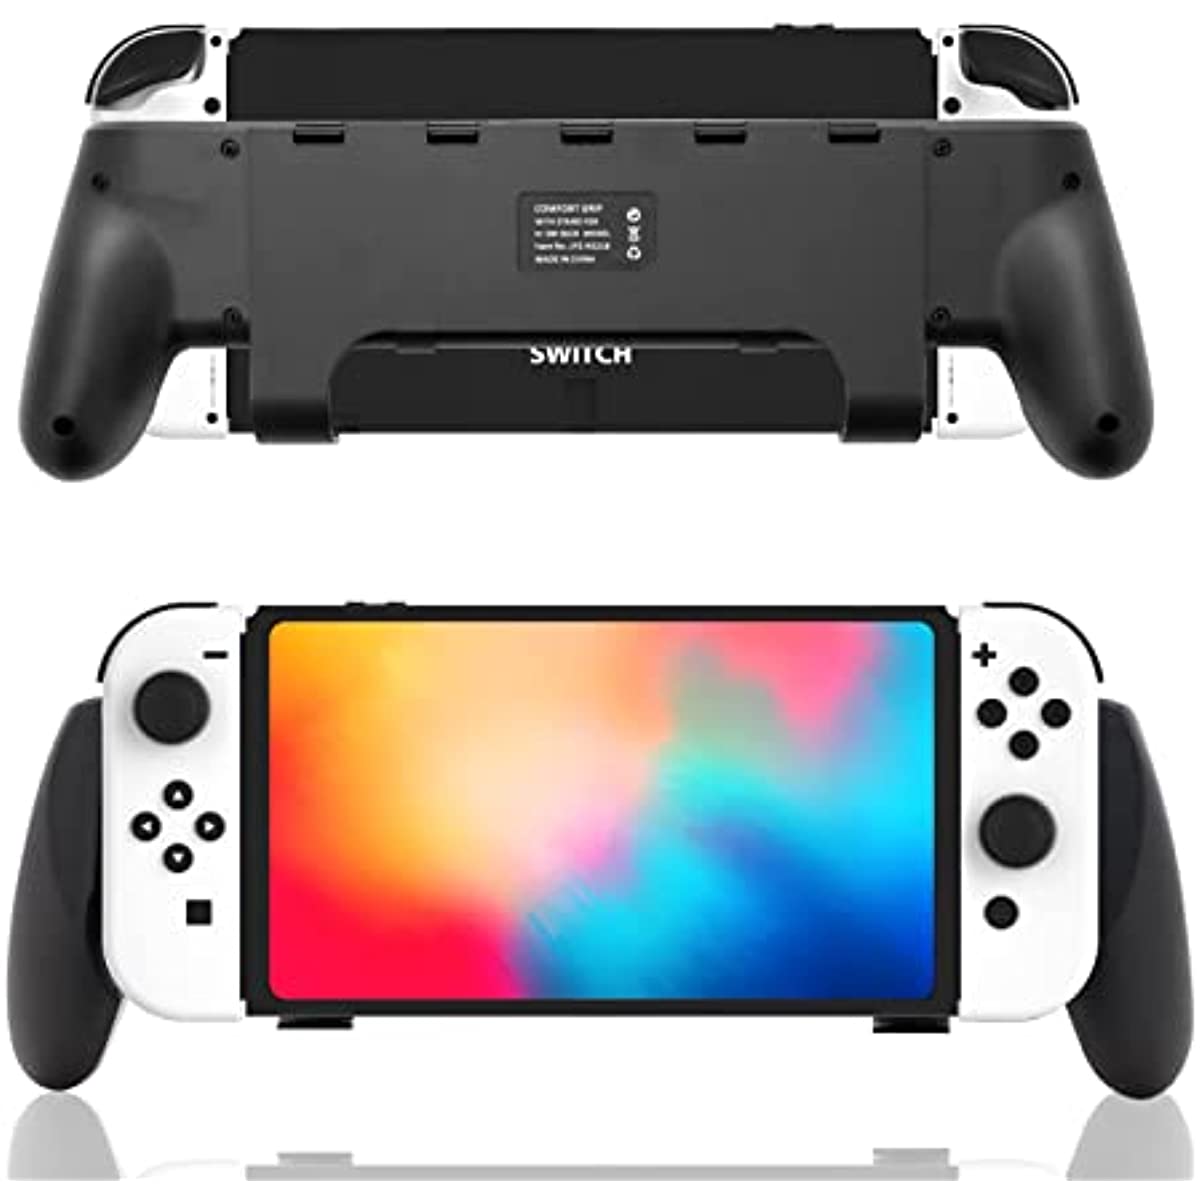 Switch OLED Grip, Switch OLED Handheld Grip with Stand and Game Card Slots - Black